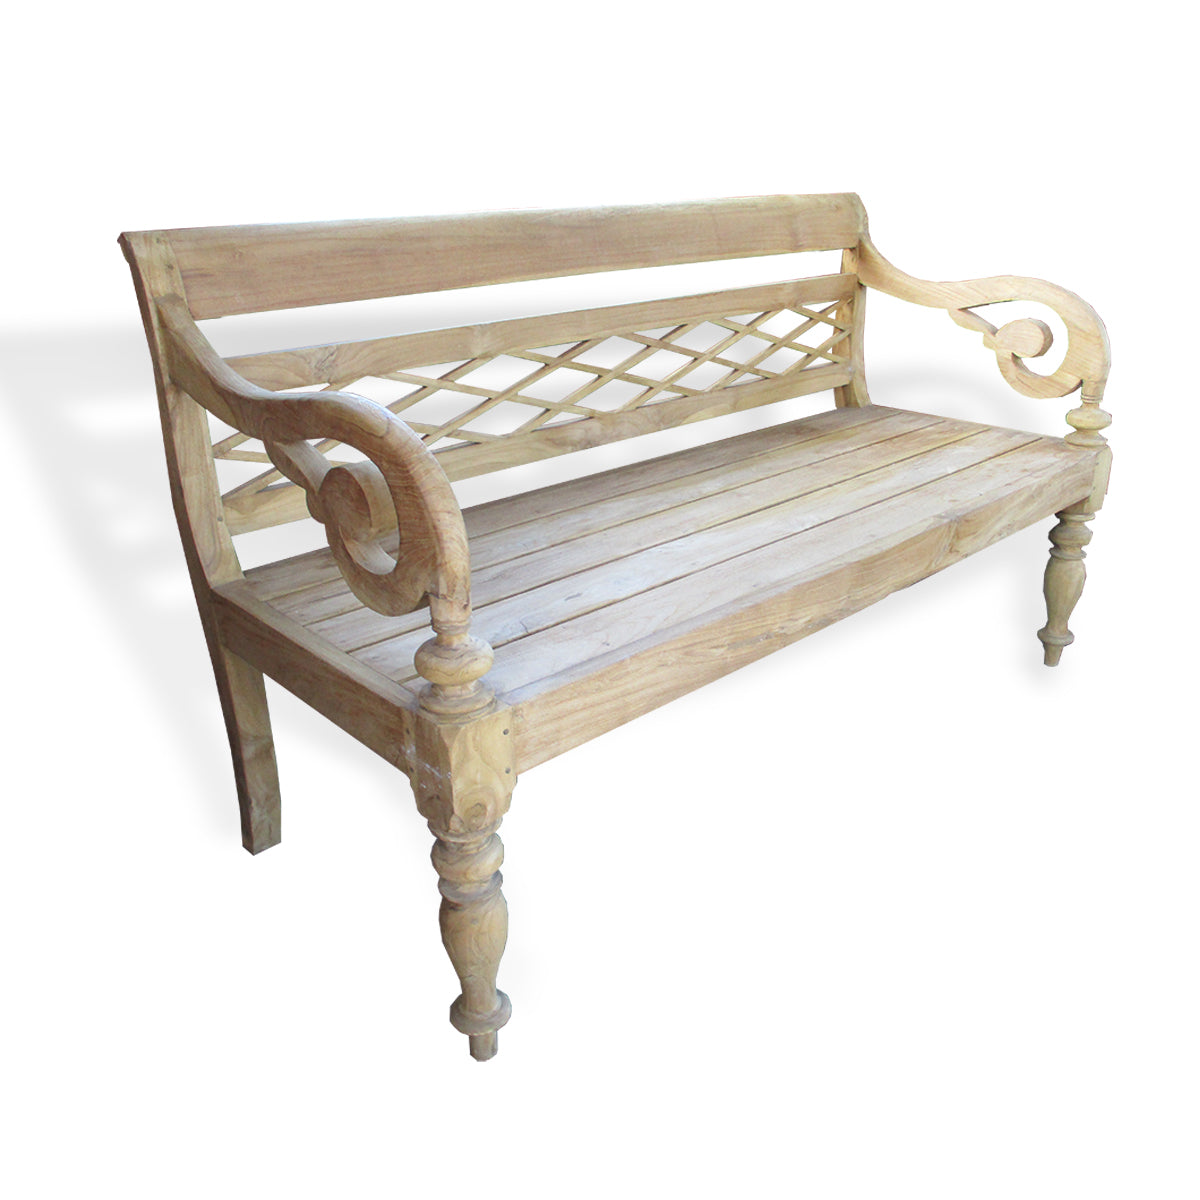 LAC031 NATURAL RECYCLED TEAK WOOD ARMED BENCH WITH CARVING